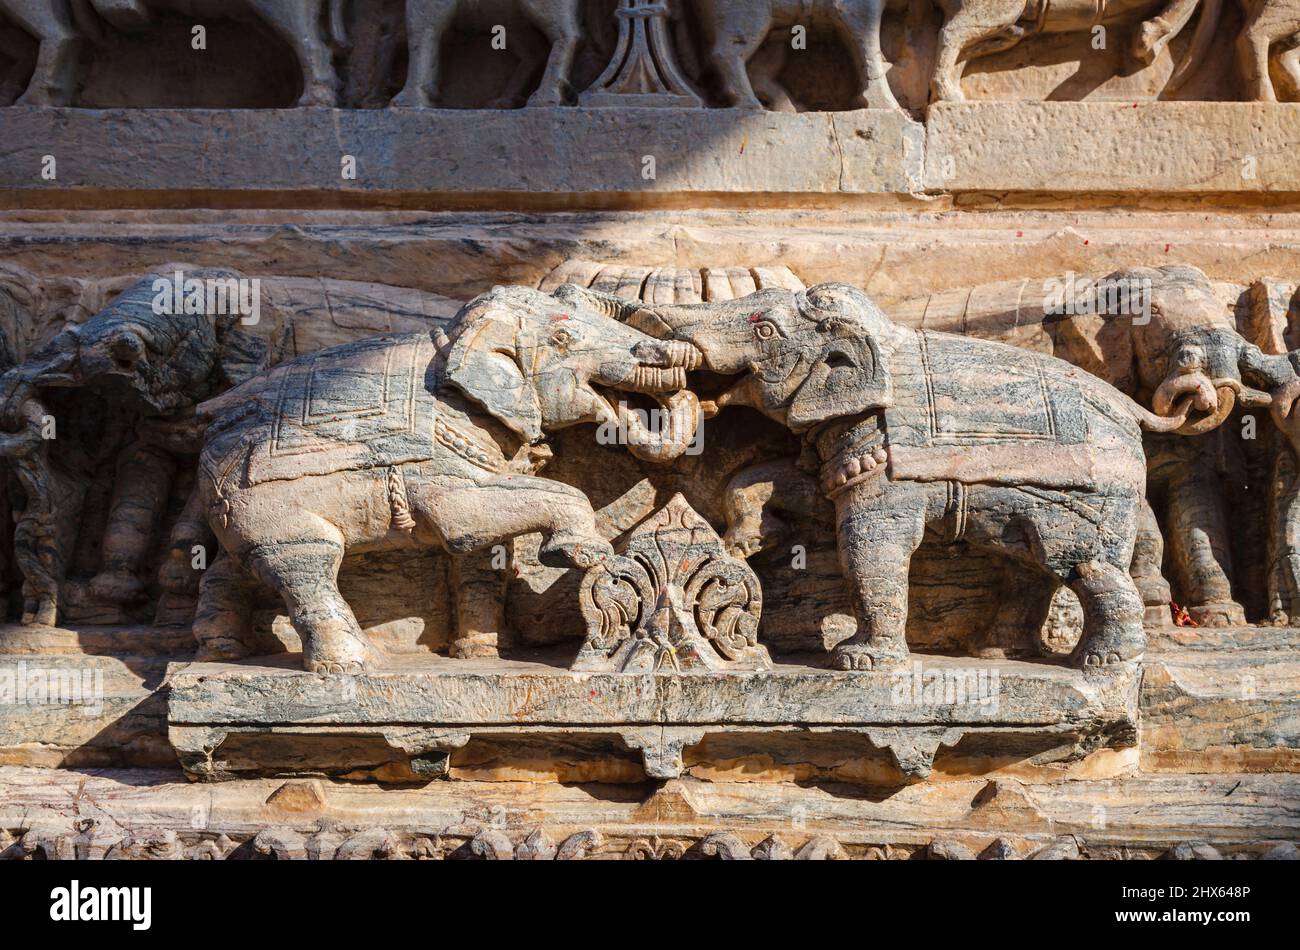 Carvings of elephants in the Jagdish Temple, a Hindu temple in Udaipur, Indian state of Rajasthan Stock Photo